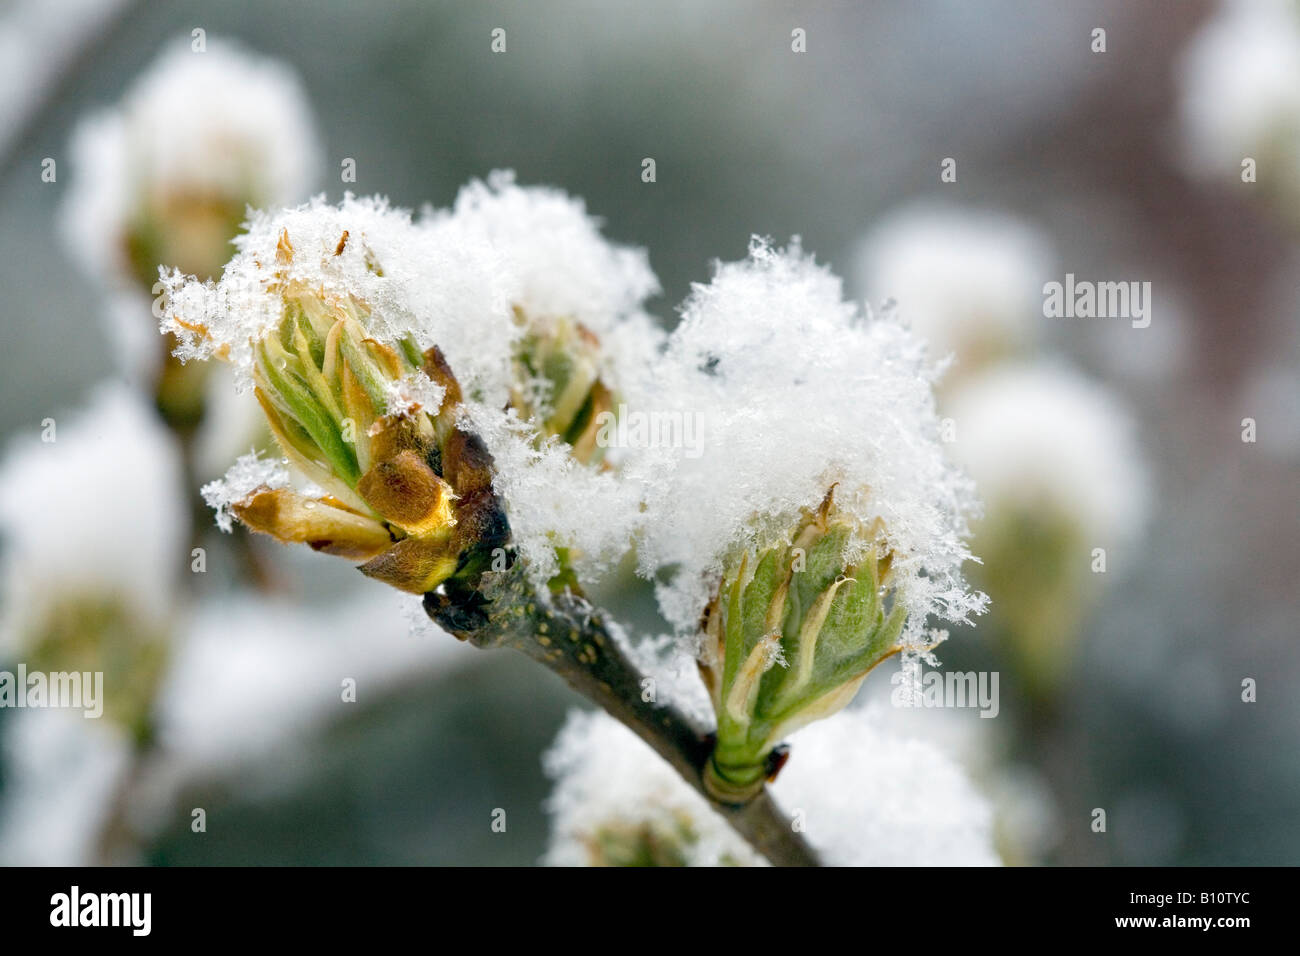 CLOSE UP OF THE BUDS OPENING ON A YOUNG PEAR TREE PYRUS COMMUNIS CONCORDE PICTURED IN SPRING DURING A SNOW FALL Stock Photo